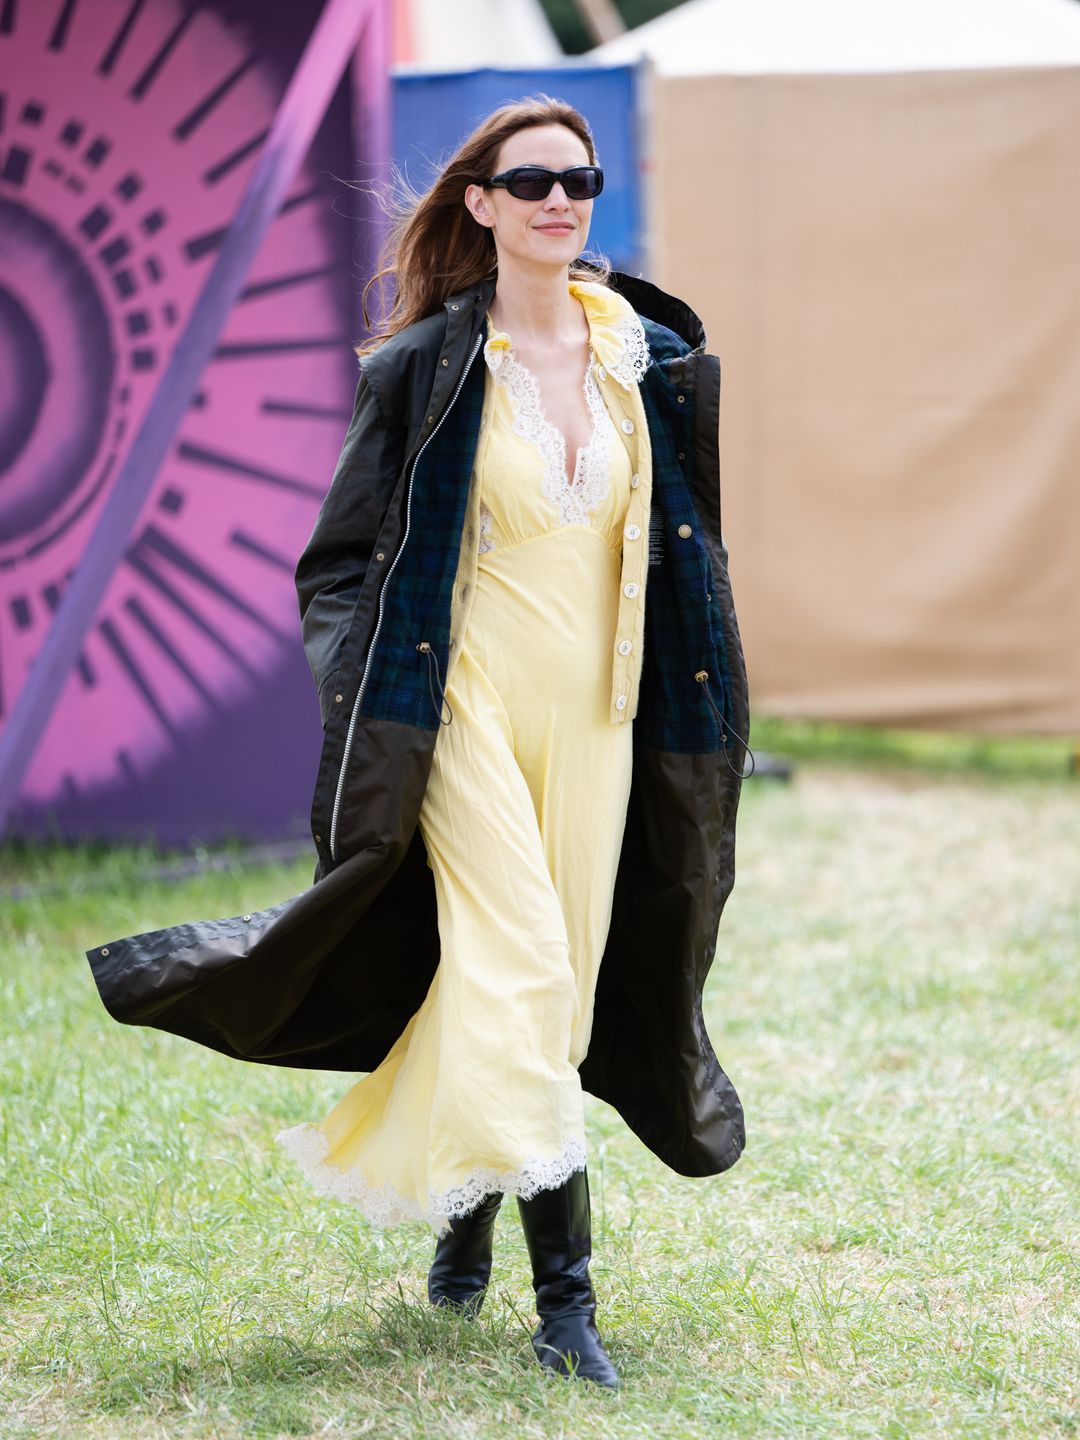 Alexa Chung during day three of Glastonbury in a yellow slip dress and a jacket from her Barbour collaboration.